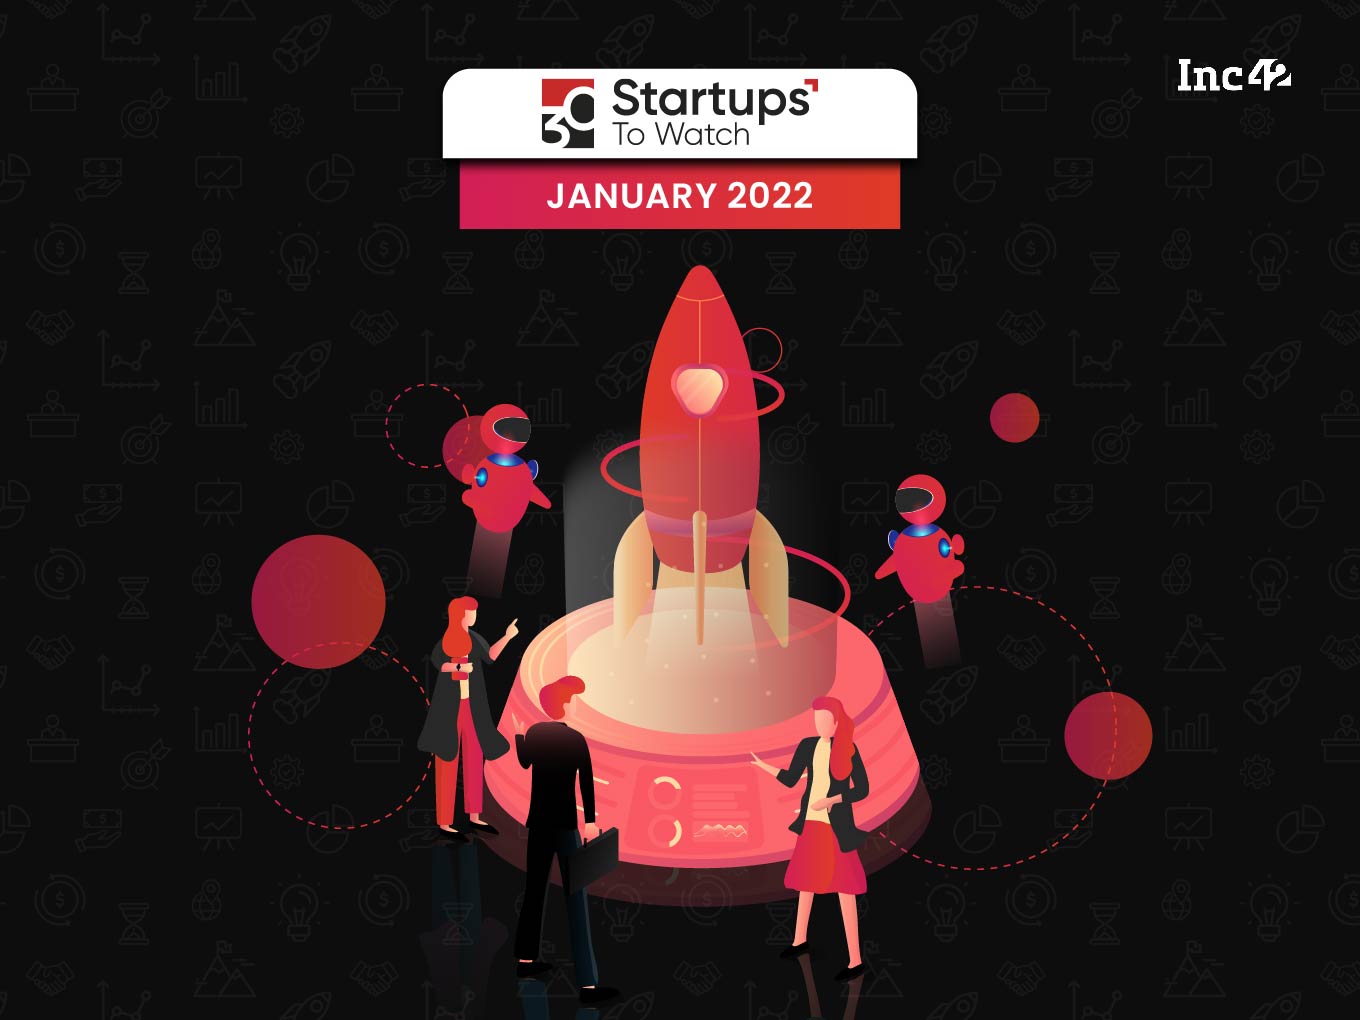 30 Startups To Watch: The Startups That Caught Our Eye In January 2022